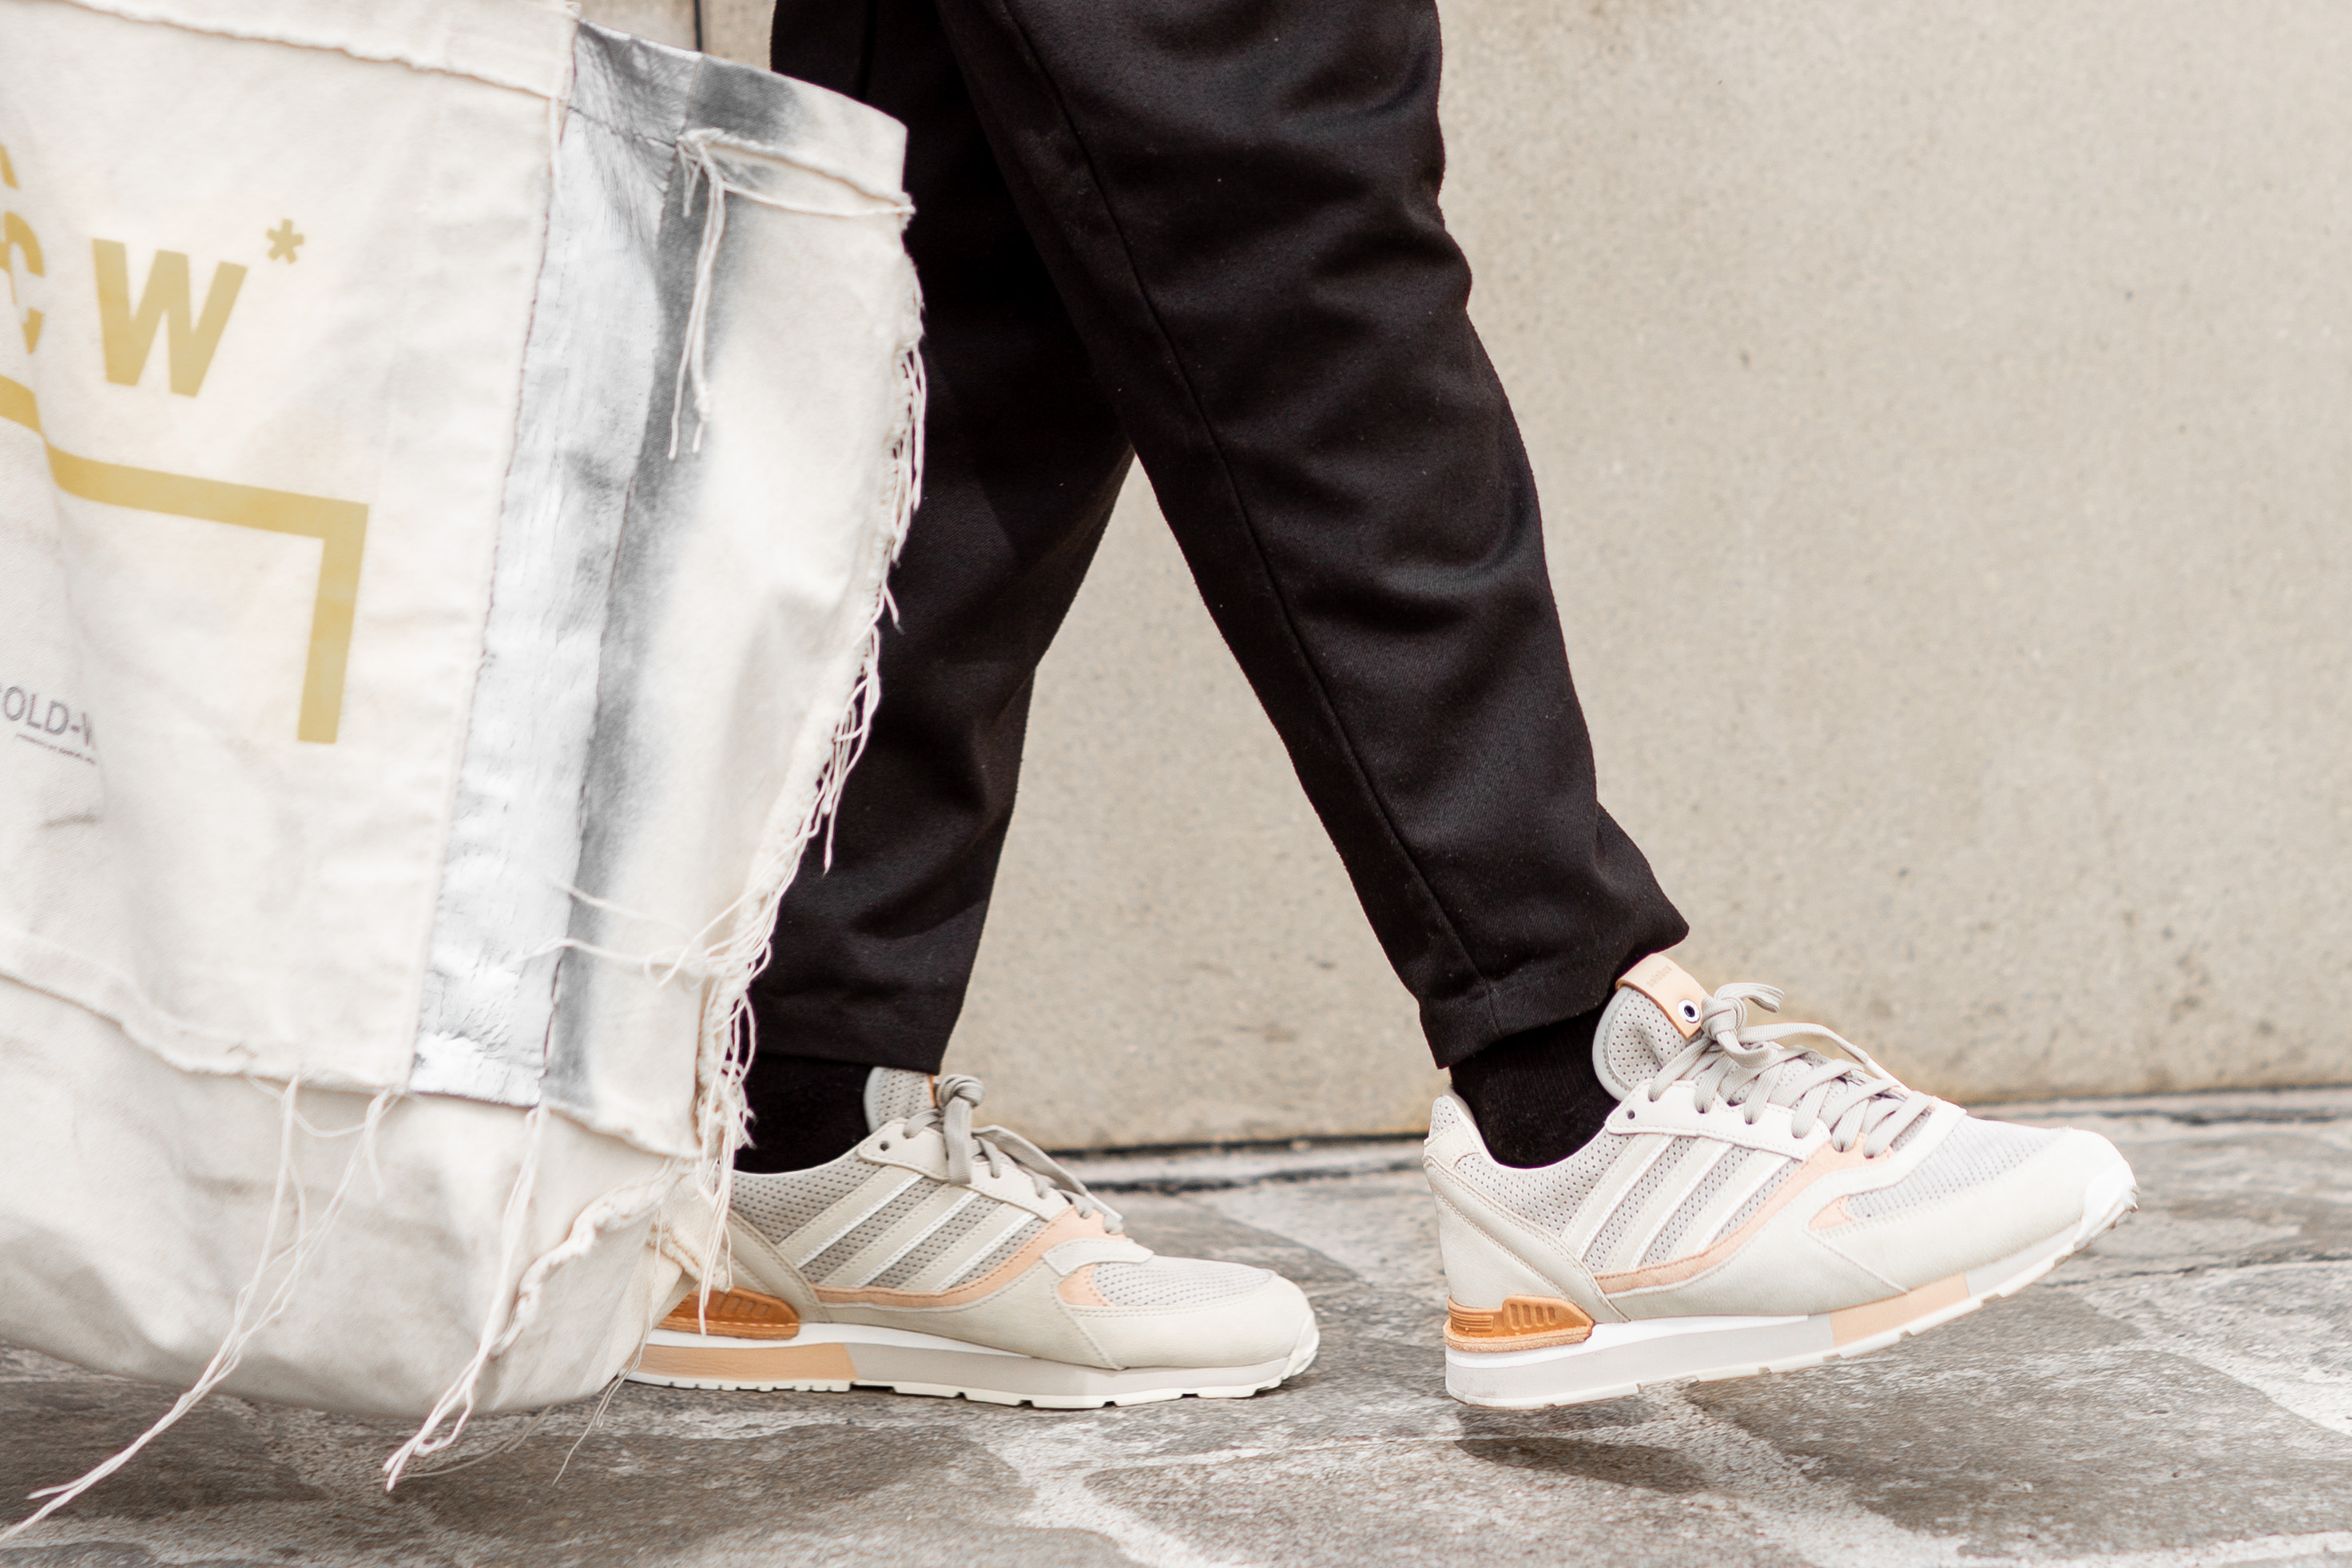 Street Style: Jean-Claude Mpassy from New Kiss on the Blog wearing Adidas X Solebox Sneakers